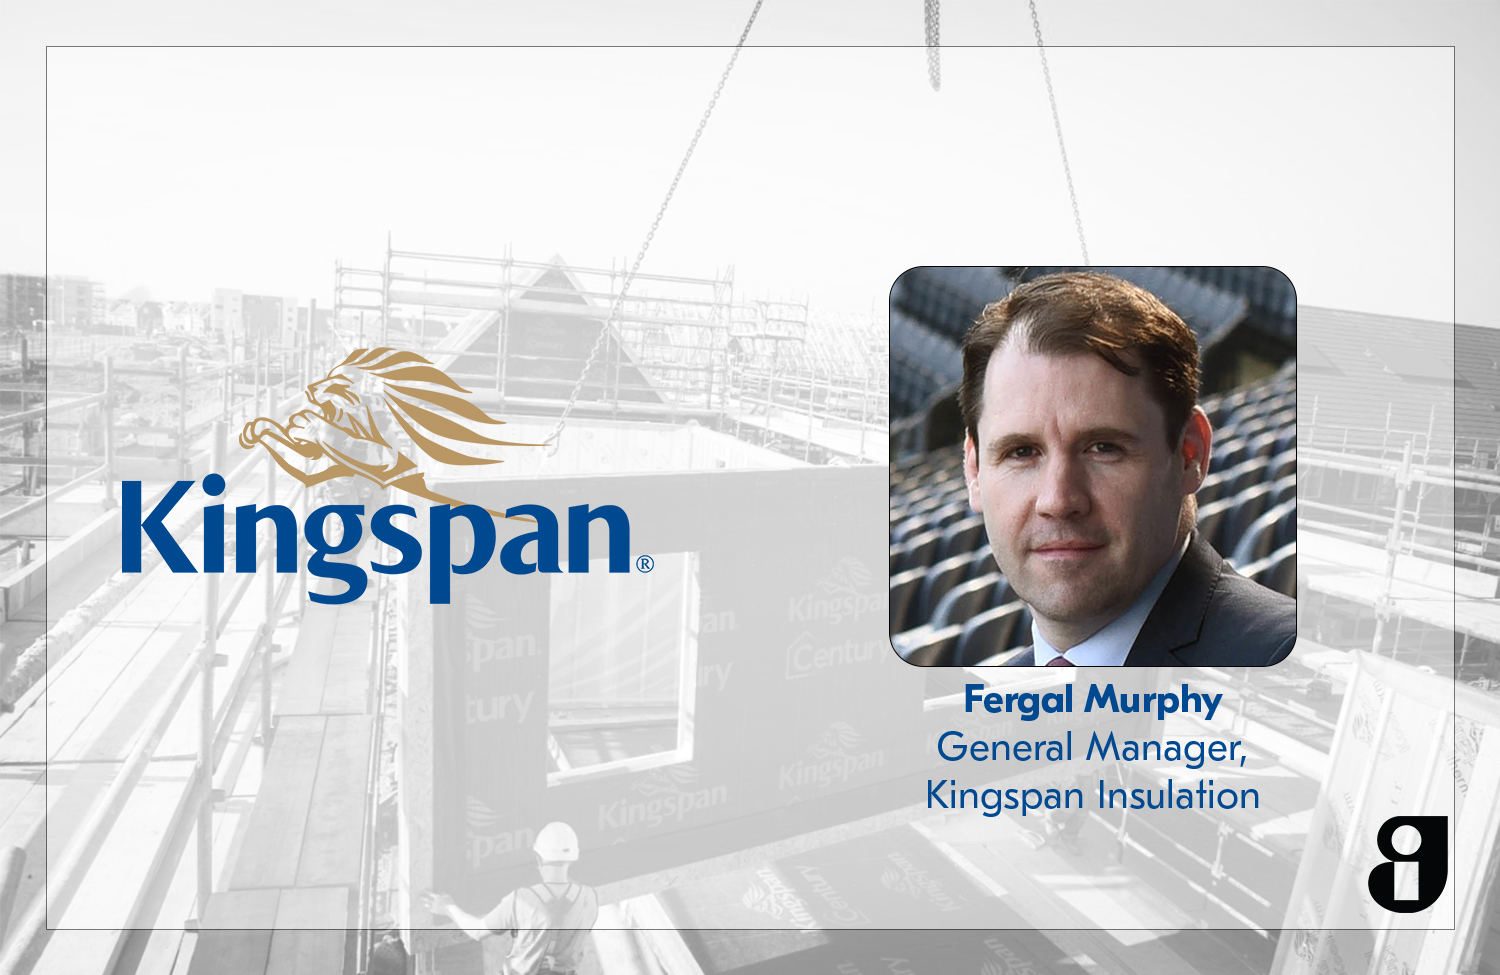 Q&A Thought Leader Series: Fergal Murphy, General Manager Kingspan Insulation